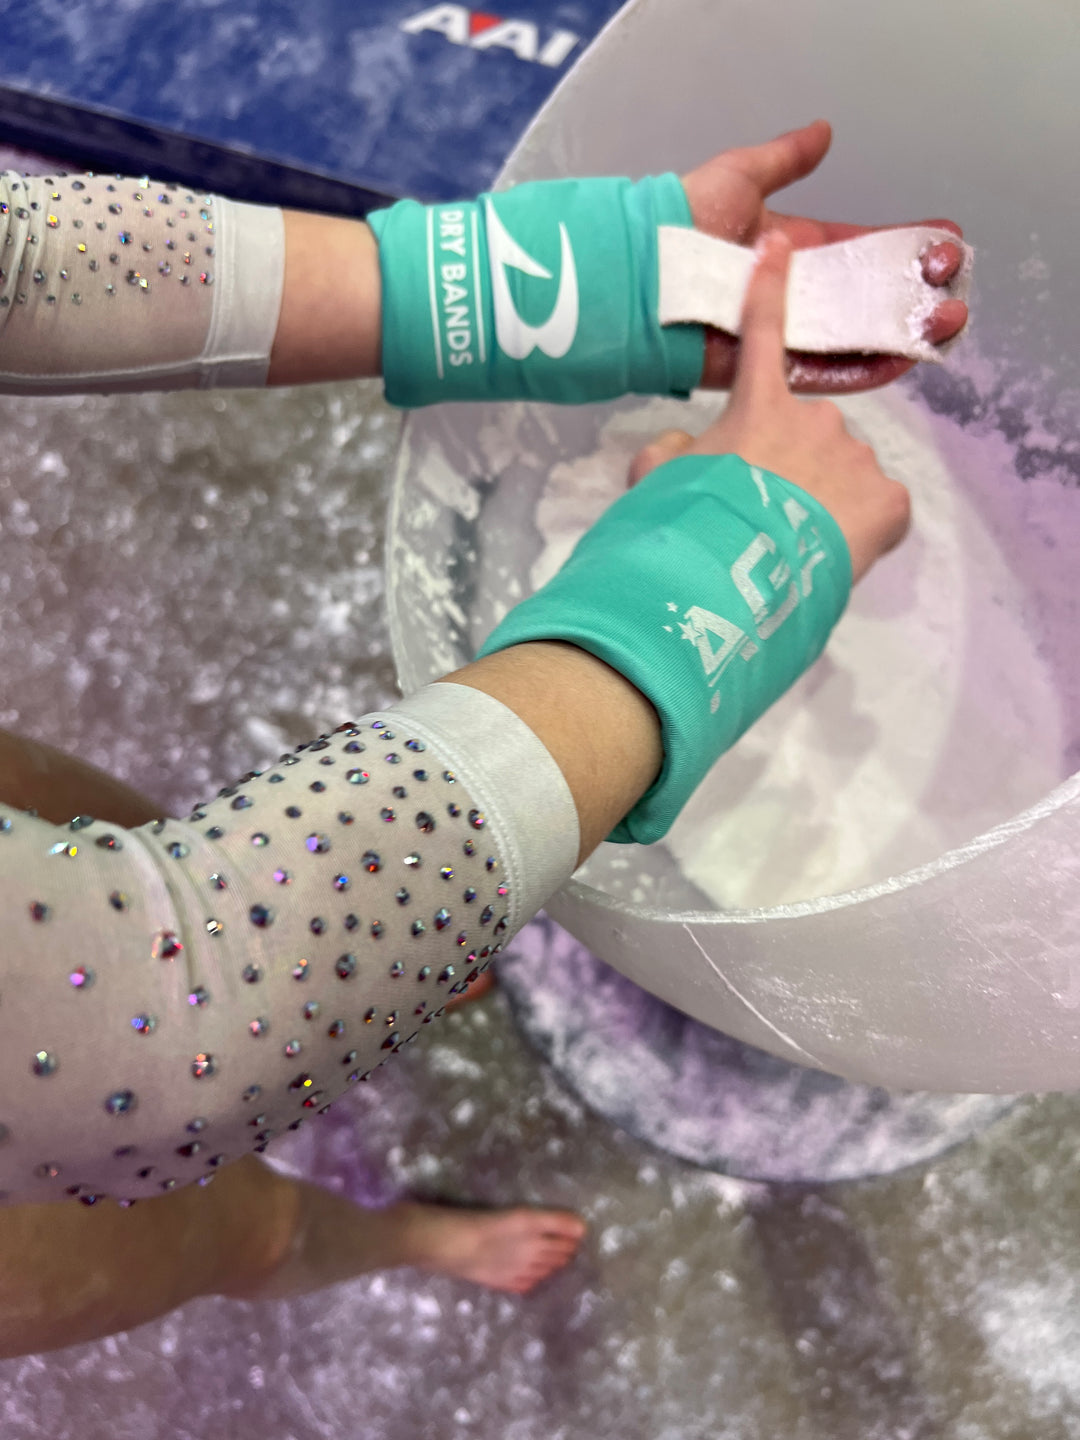 Gymnast chalking up at competition wearing DRYbands, best wristbands for gymnastics